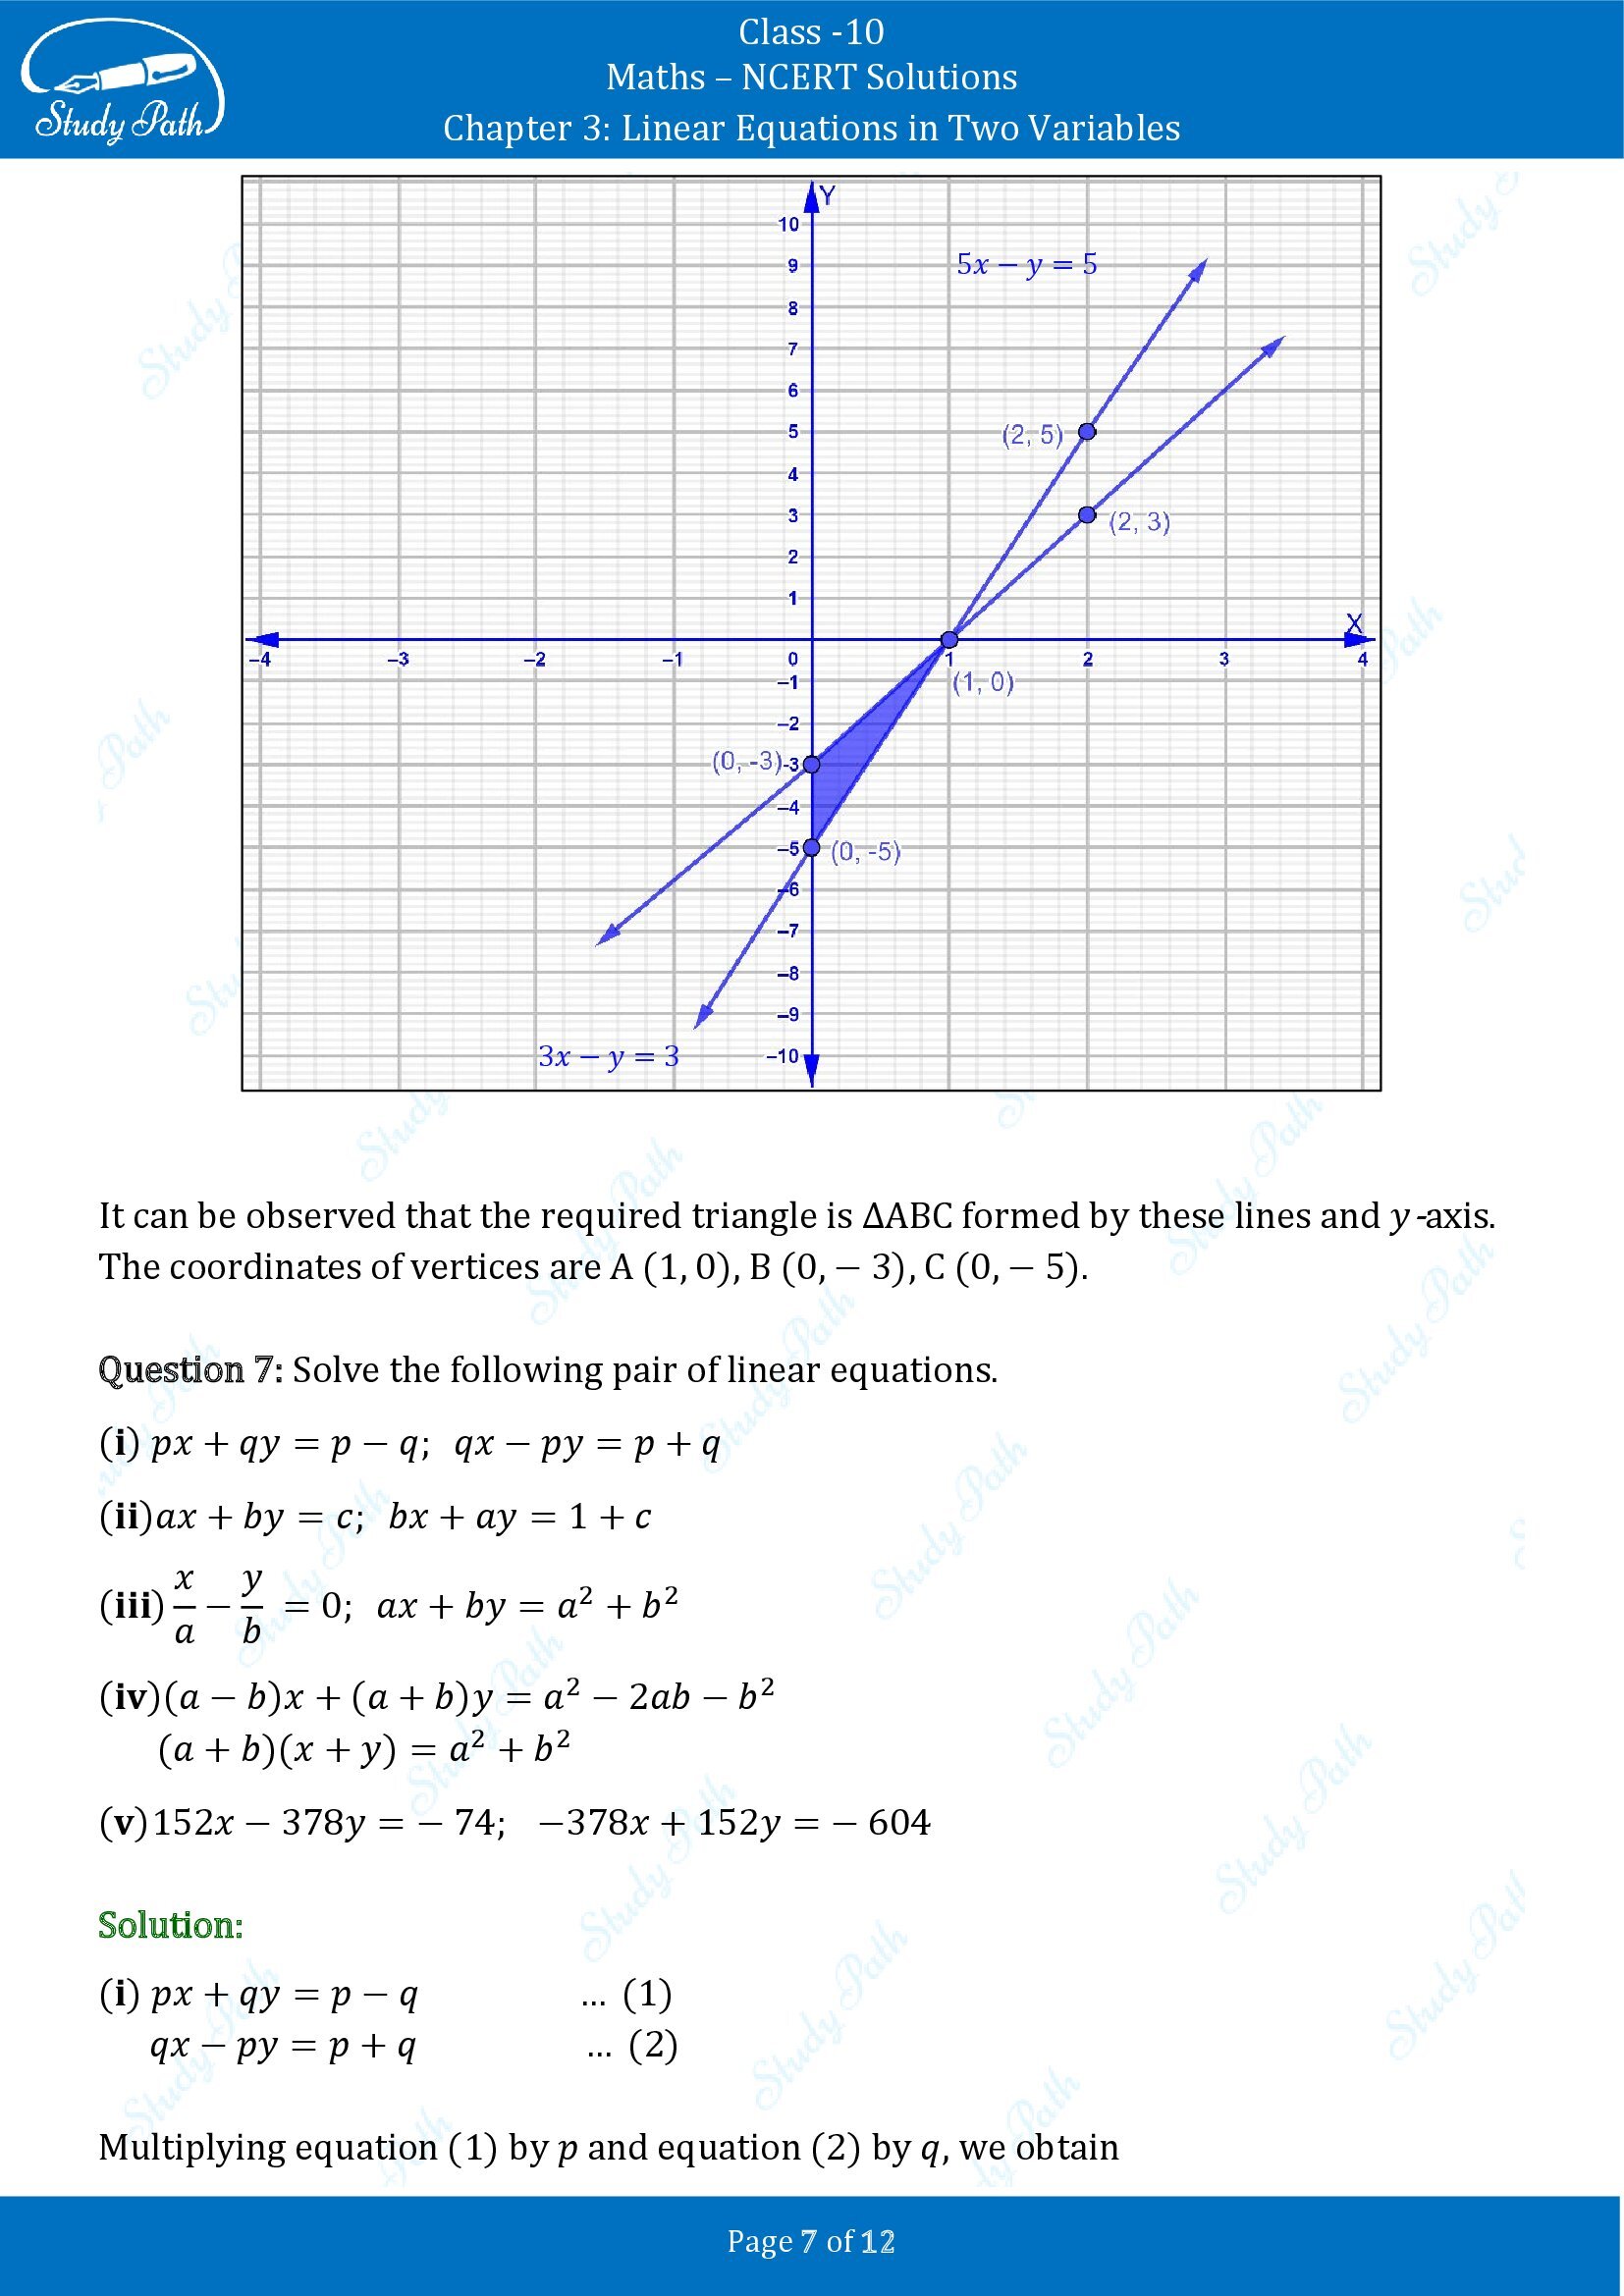 NCERT Solutions for Class 10 Maths Chapter 3 Linear Equations in Two Variables Exercise 3.7 00007